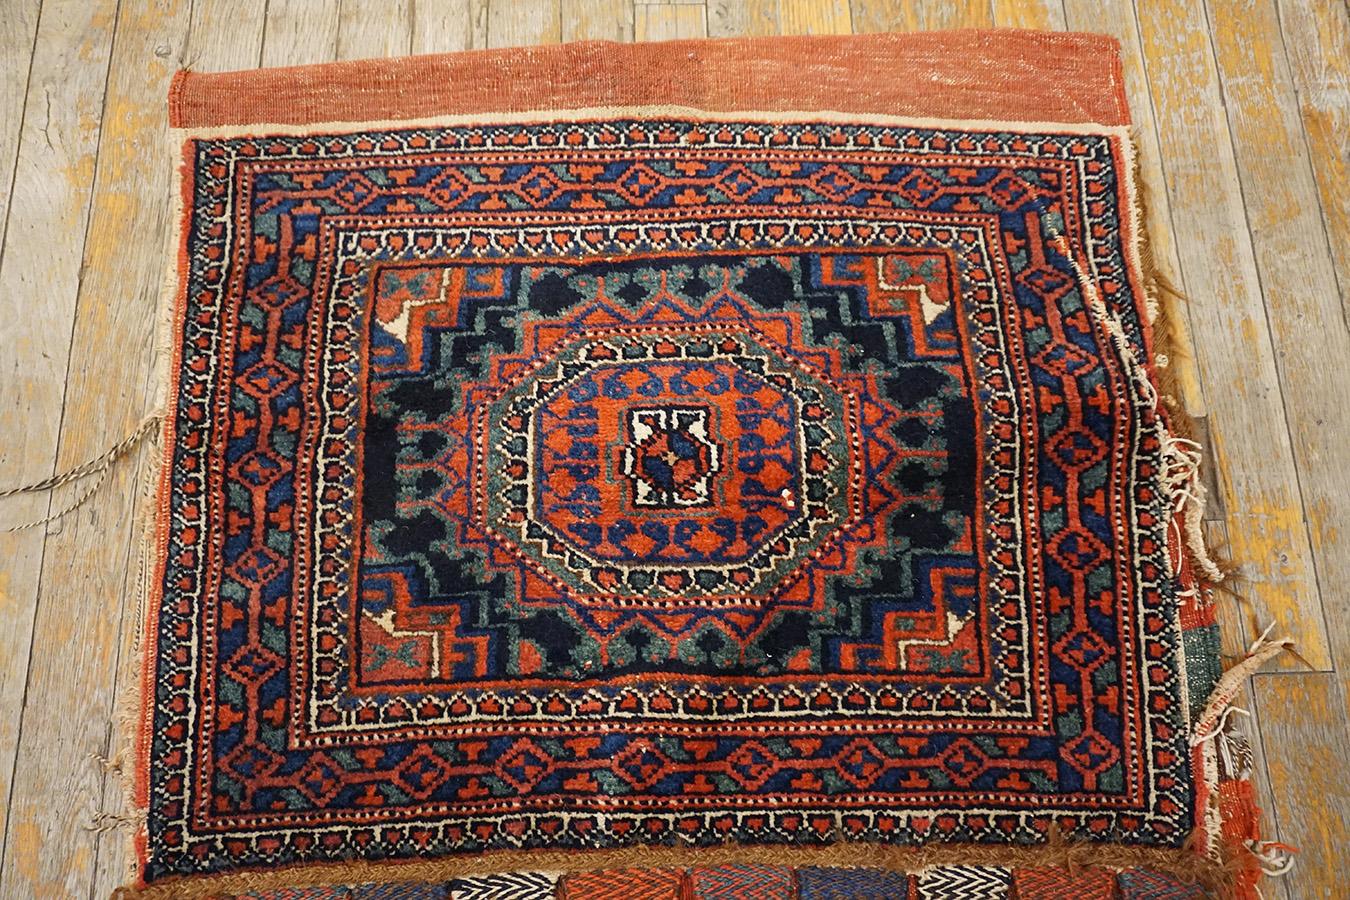 Hand-Knotted Early 20th Century S. Persian Double Saddle-Bag Carpet ( 2'4